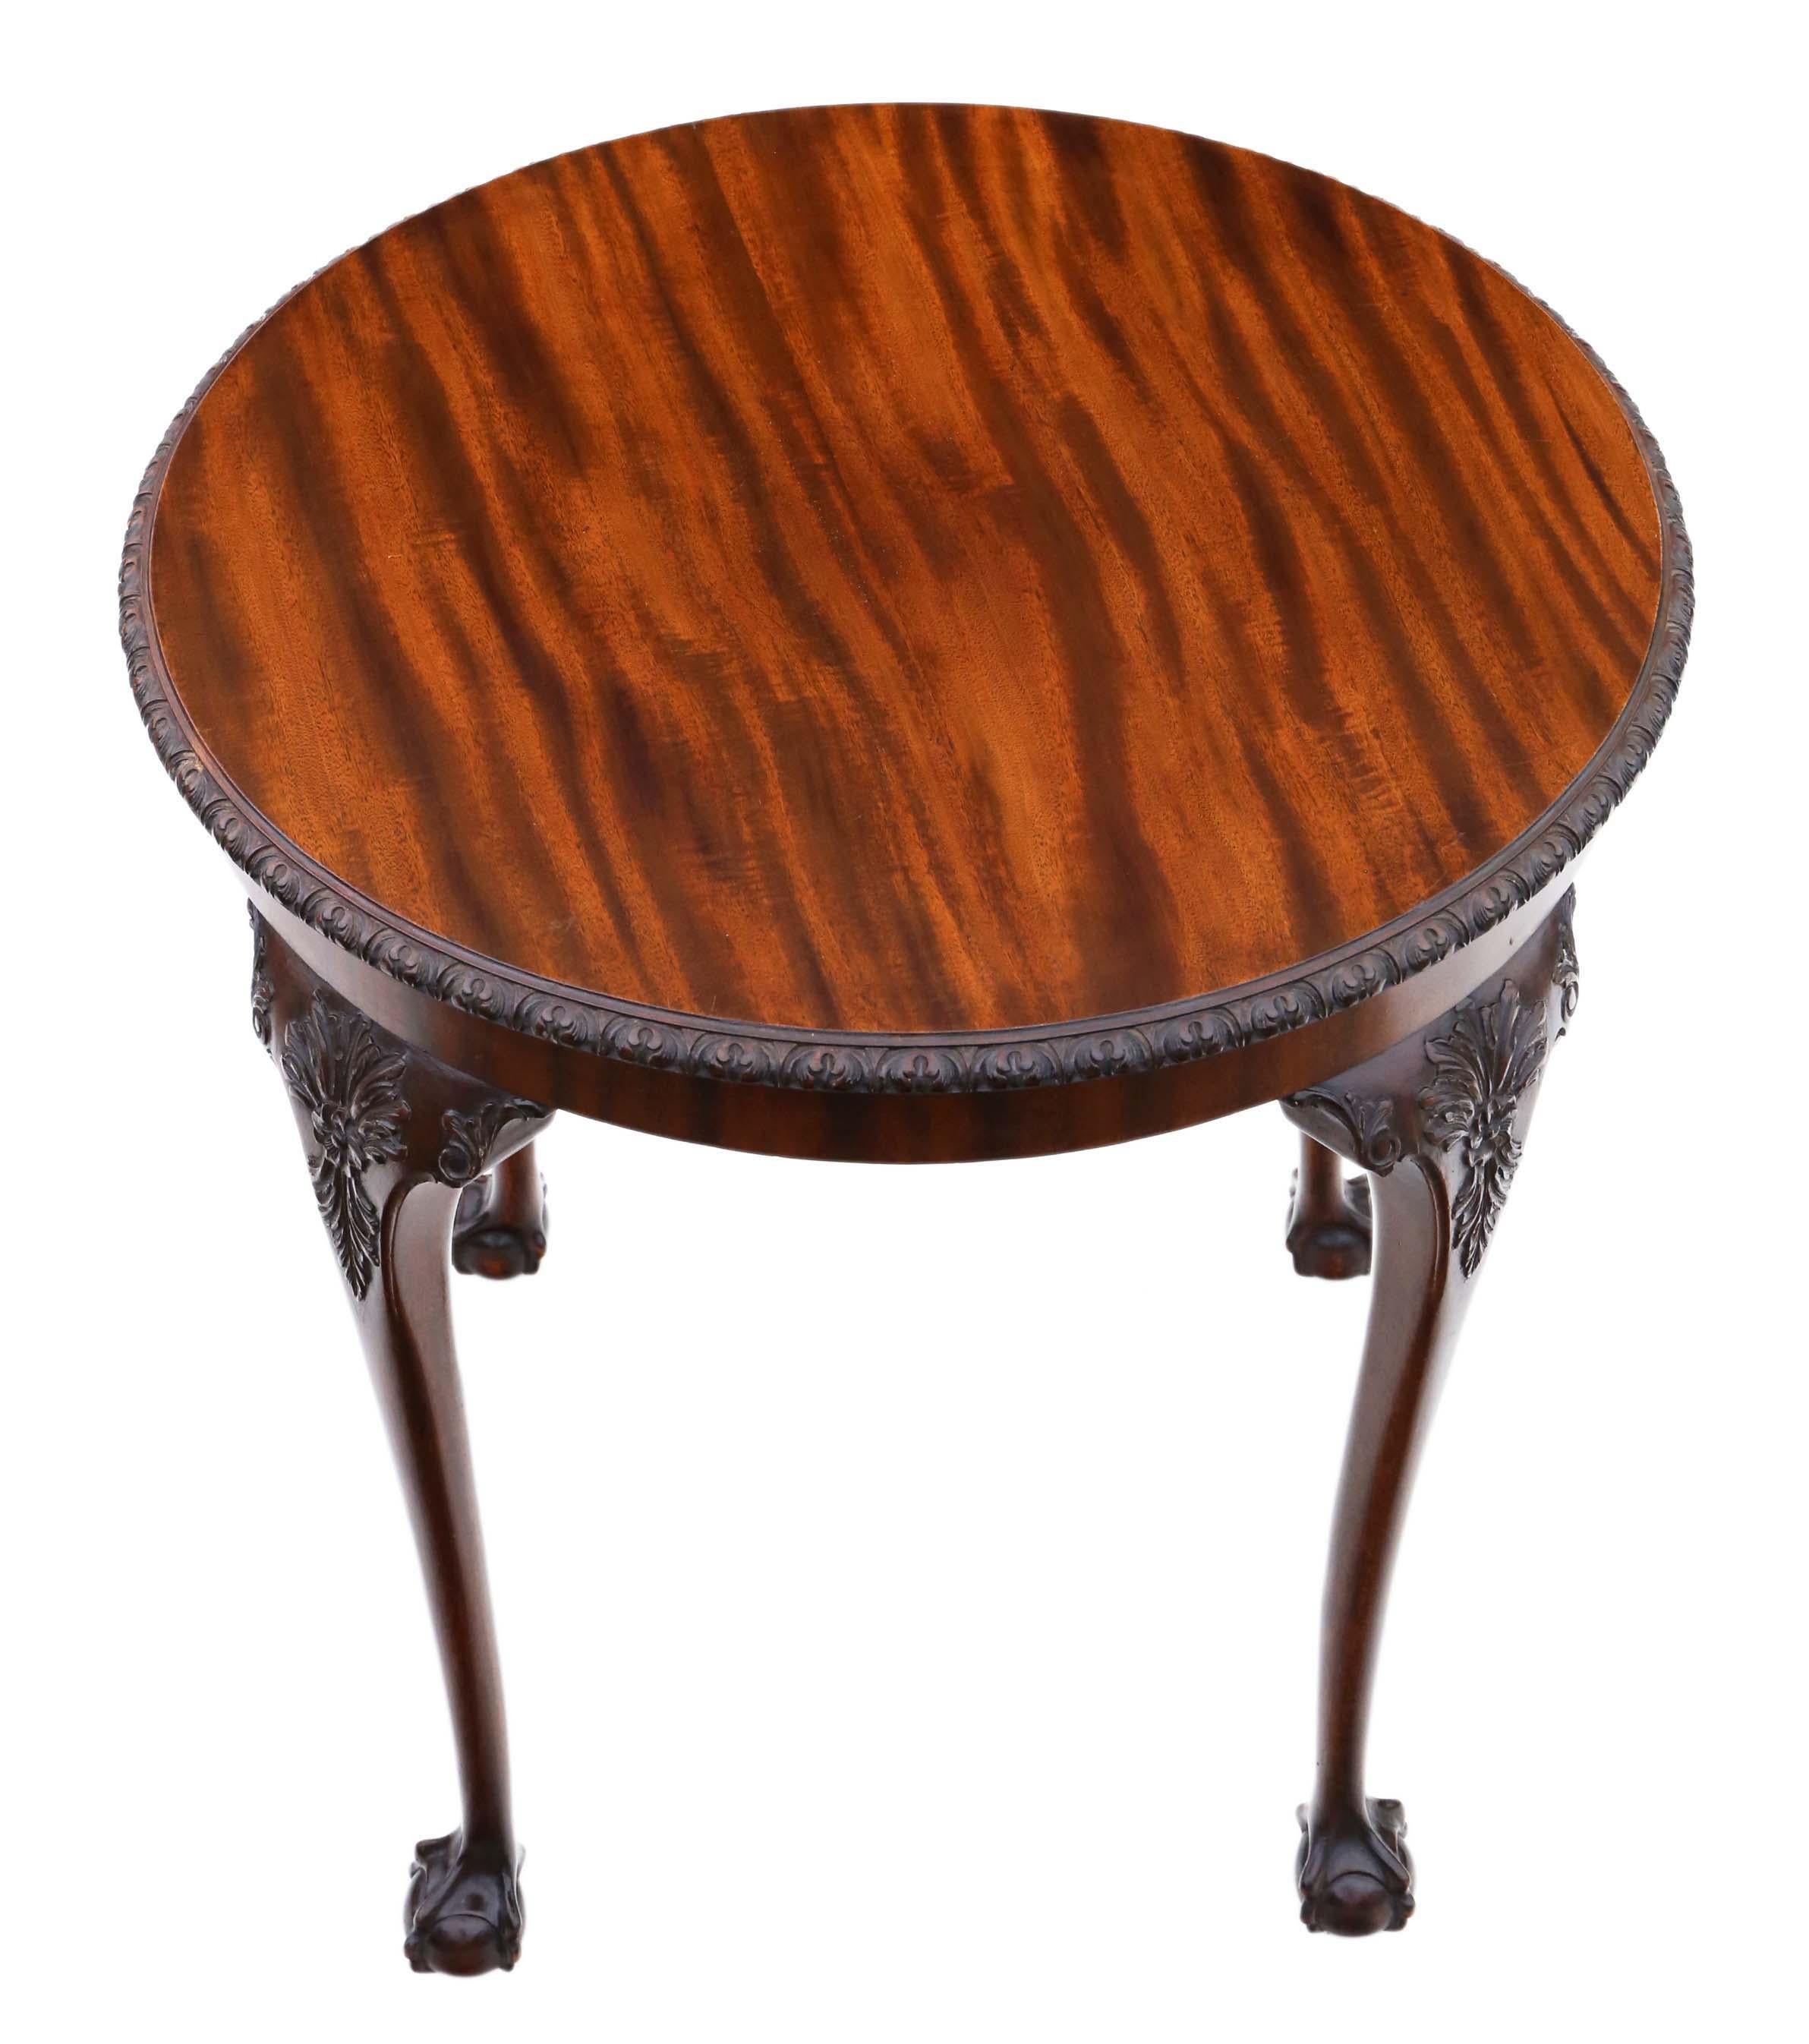 Antique fine quality C1910 carved mahogany circular occasional, side, centre, or window table (in the manner of Gillows).

No loose joints and no woodworm. A rare decorative find, having attractive carved cabriole legs with ball and claw